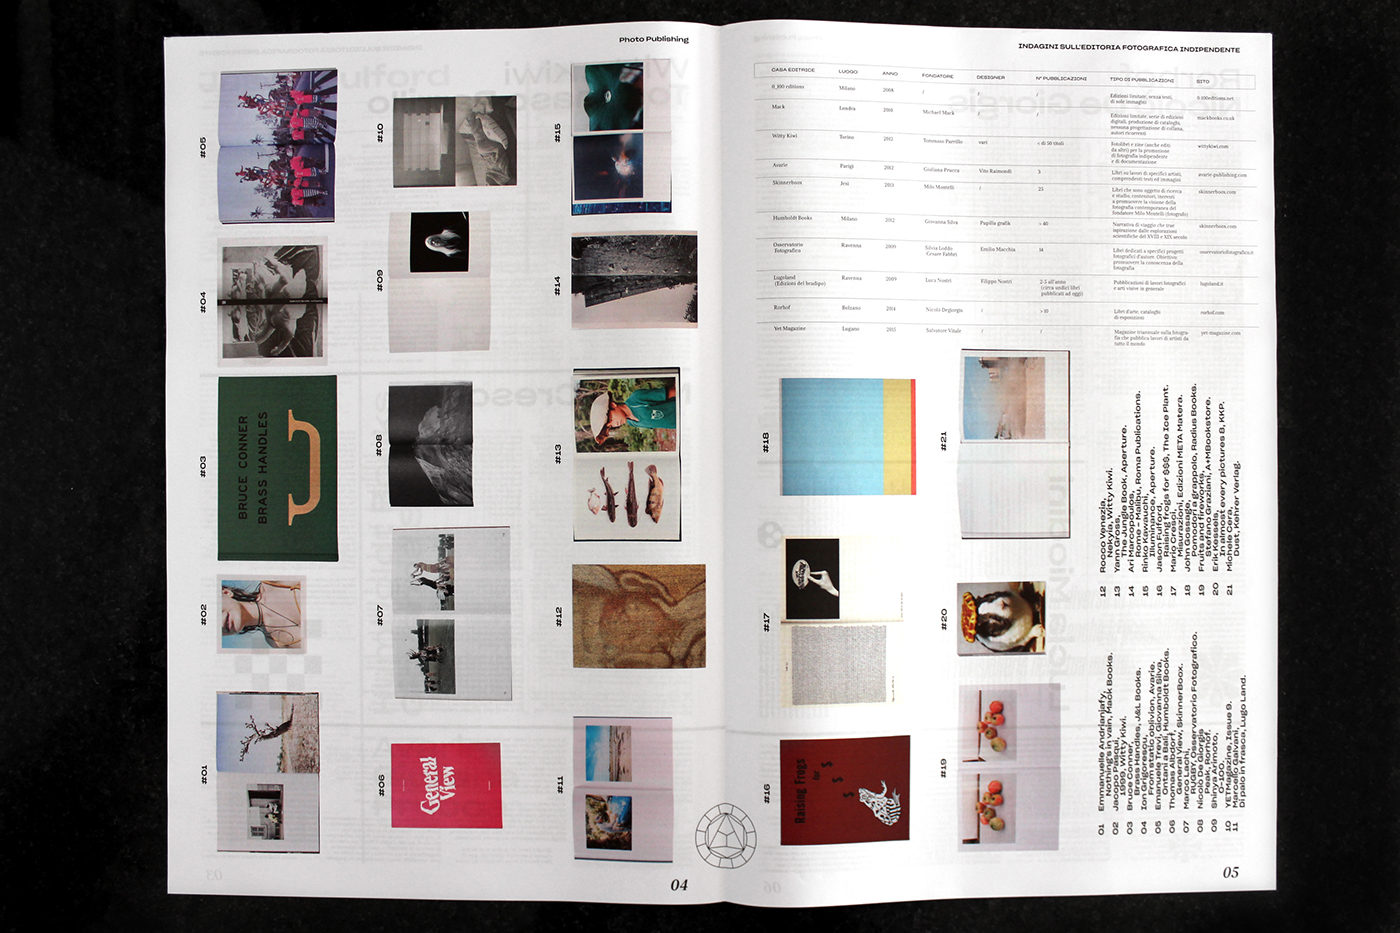 Photography  publishing   editorial design  graphic design  paper offset typography  